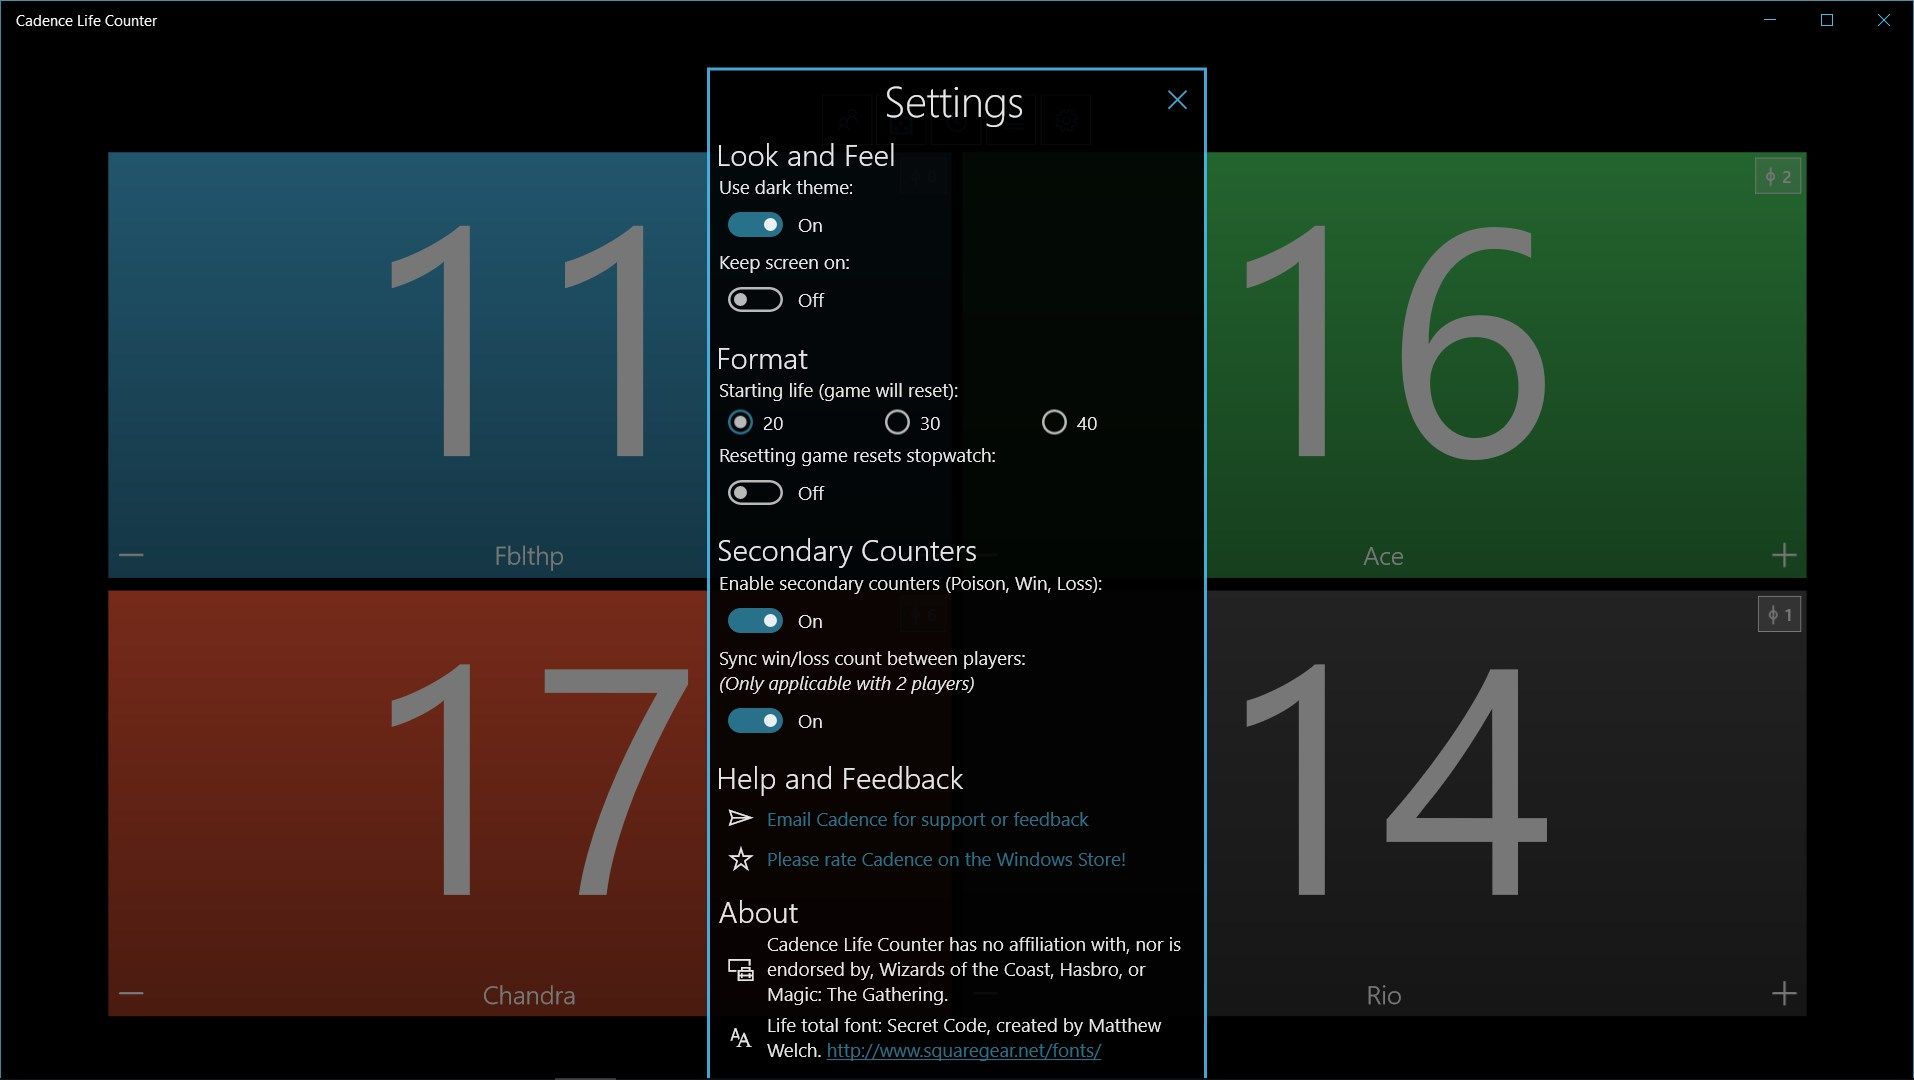 Customize app settings to fit your playstyle.